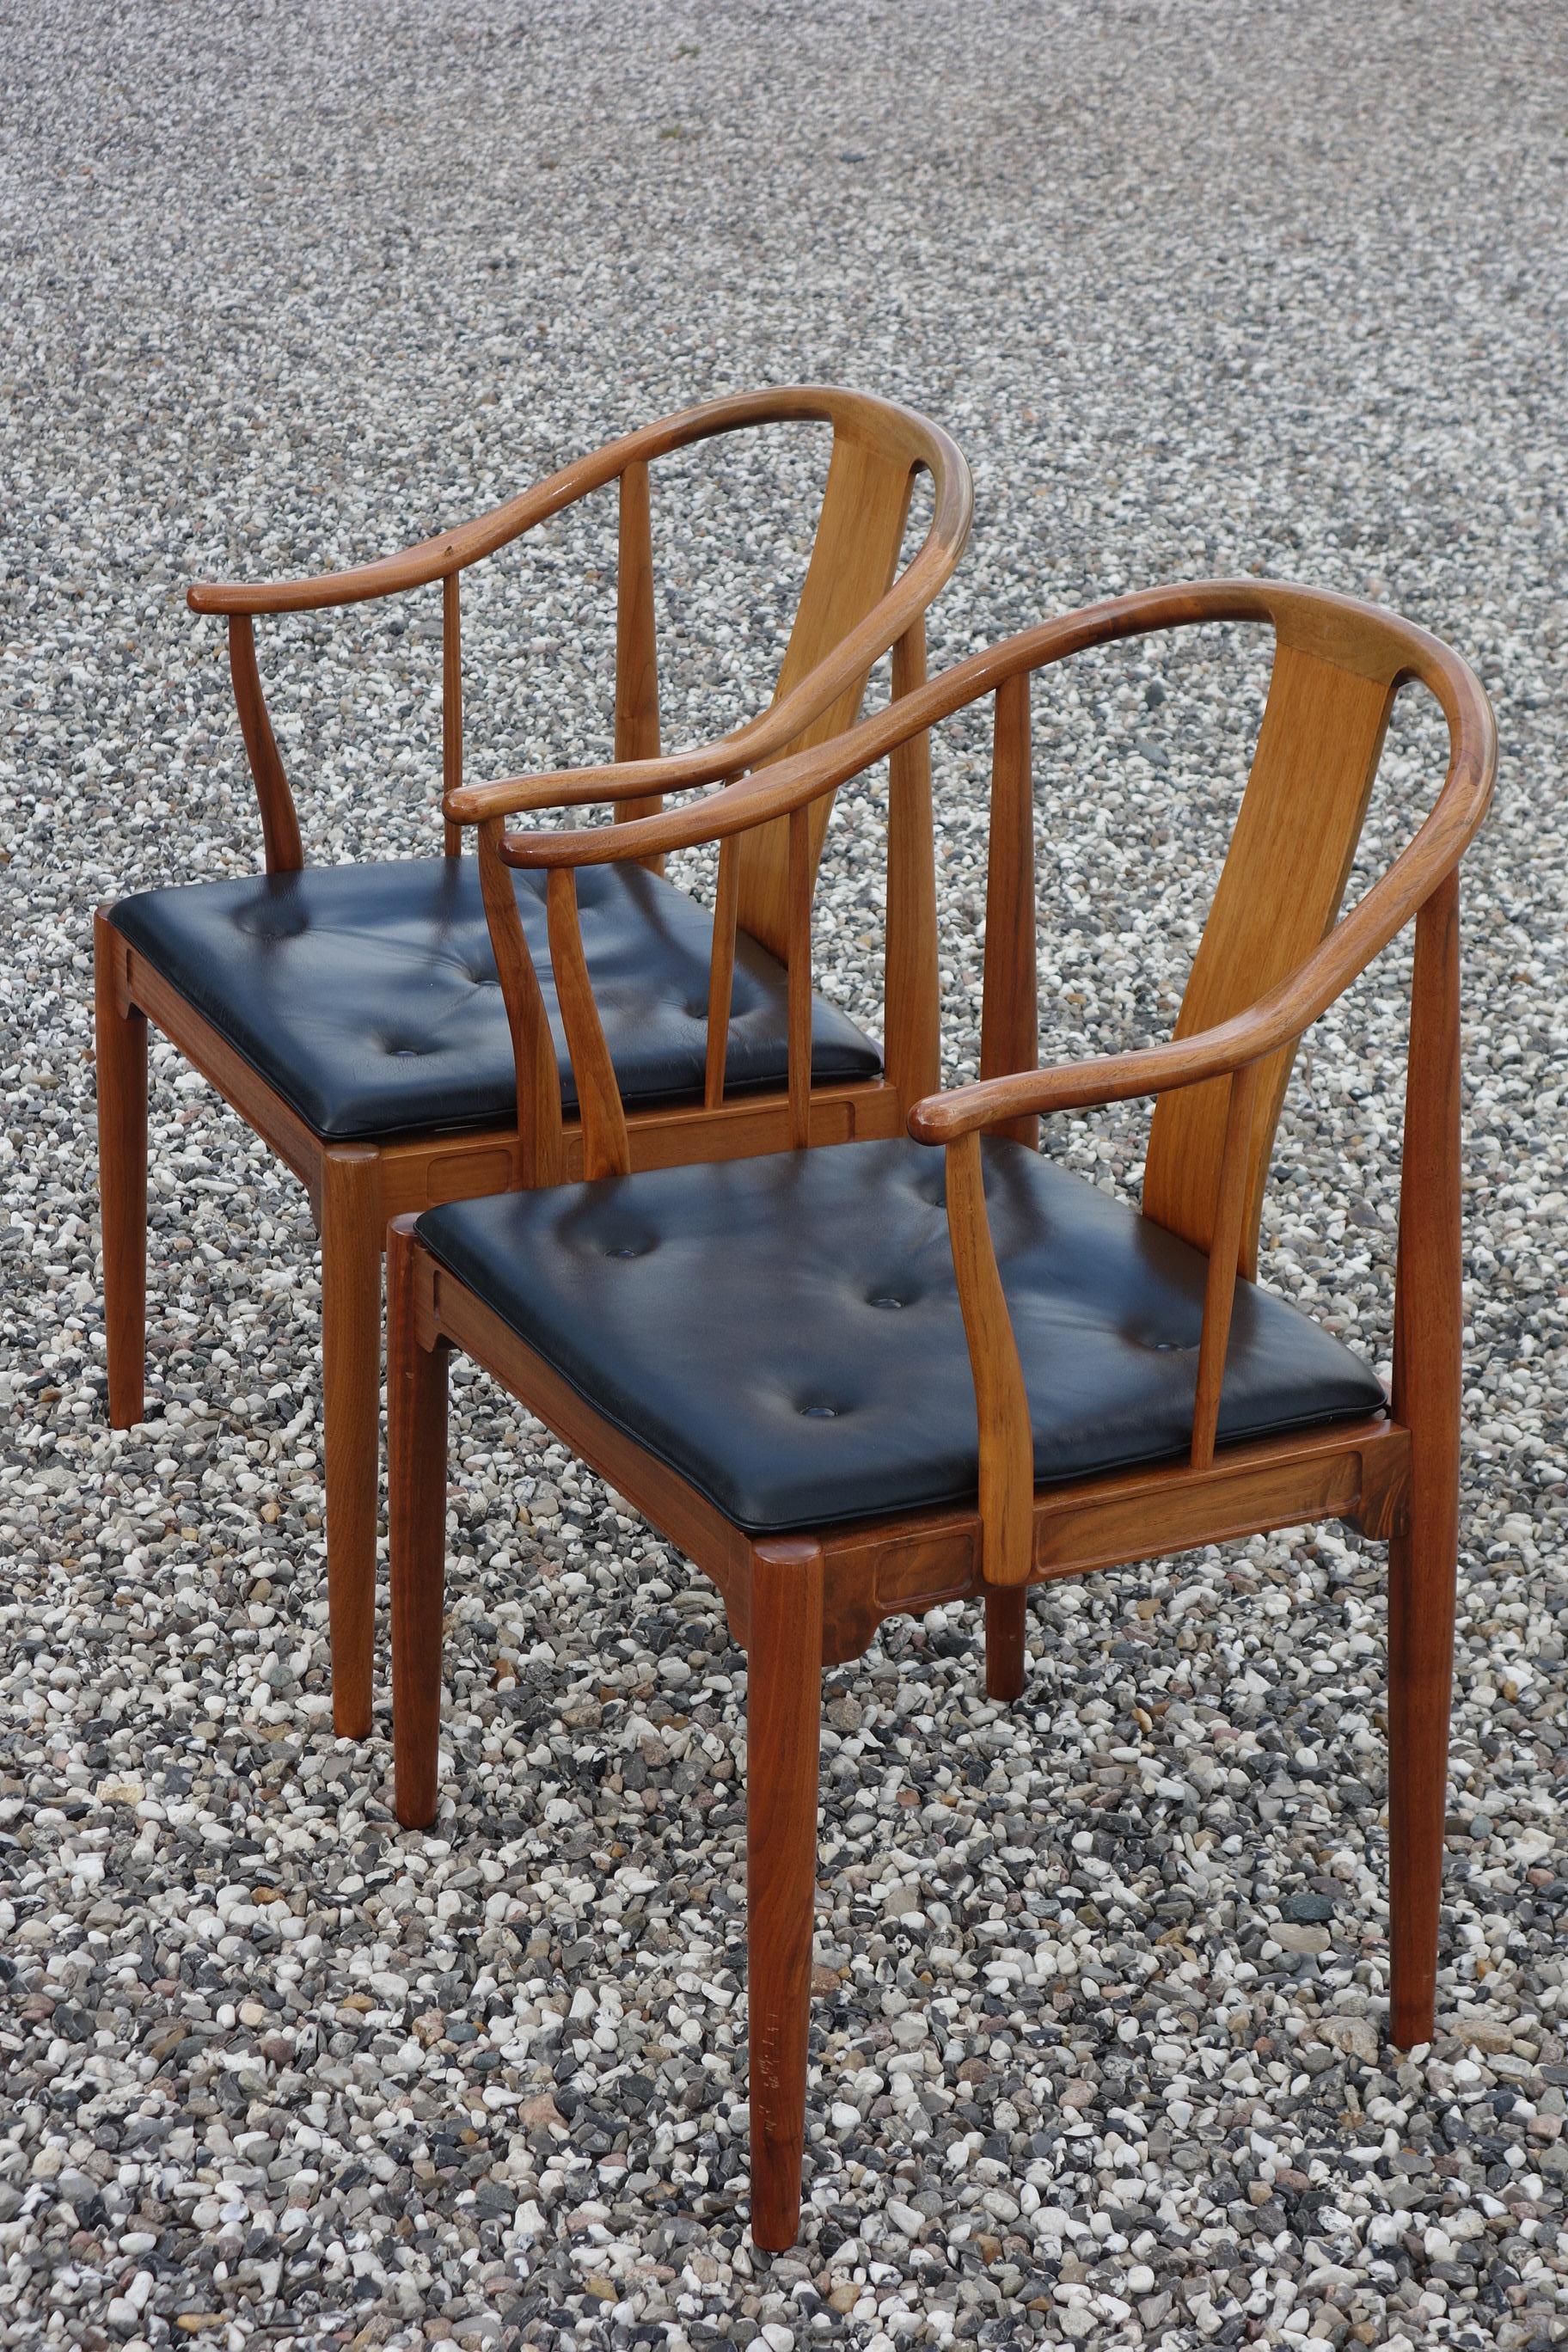 Hans J. Wegner: A pair of flamed walnut armchairs “China chairs”. Loose seat cushion upholstered with black leather, fitted with buttons. Model 4283. Designed 1944. Manufactured 1977 by Fritz Hansen with maker's silver plaque in back. The China